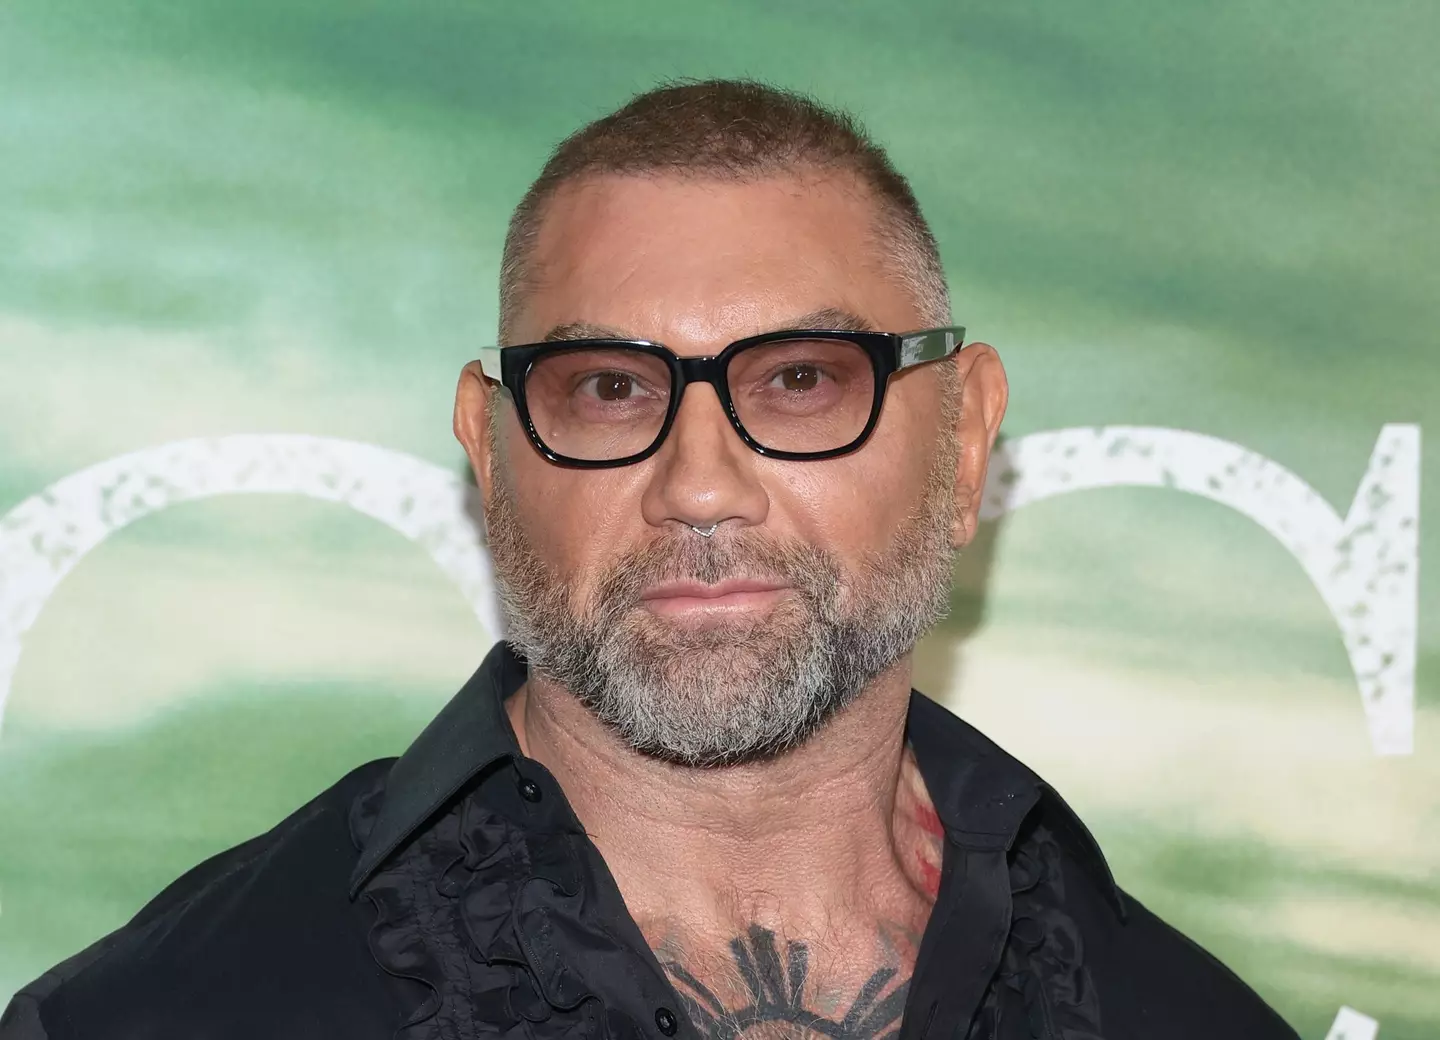 Dave Bautista is an avid gym-goer - if you couldn't tell.